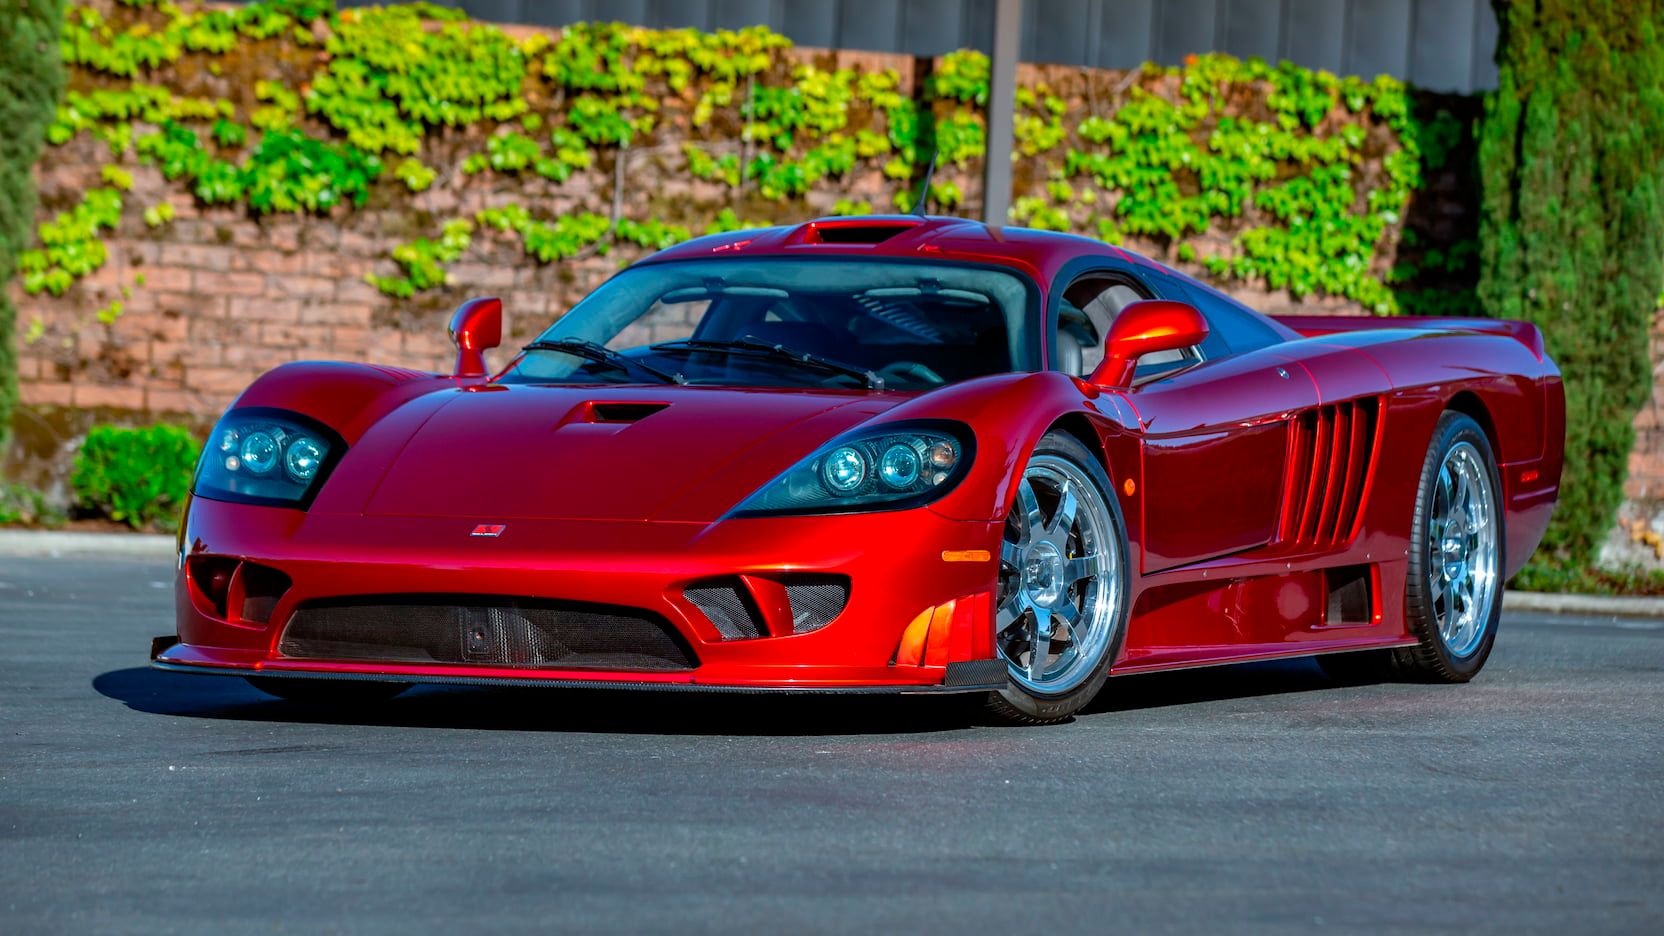 Saleen S7 Red, front 3/4 view